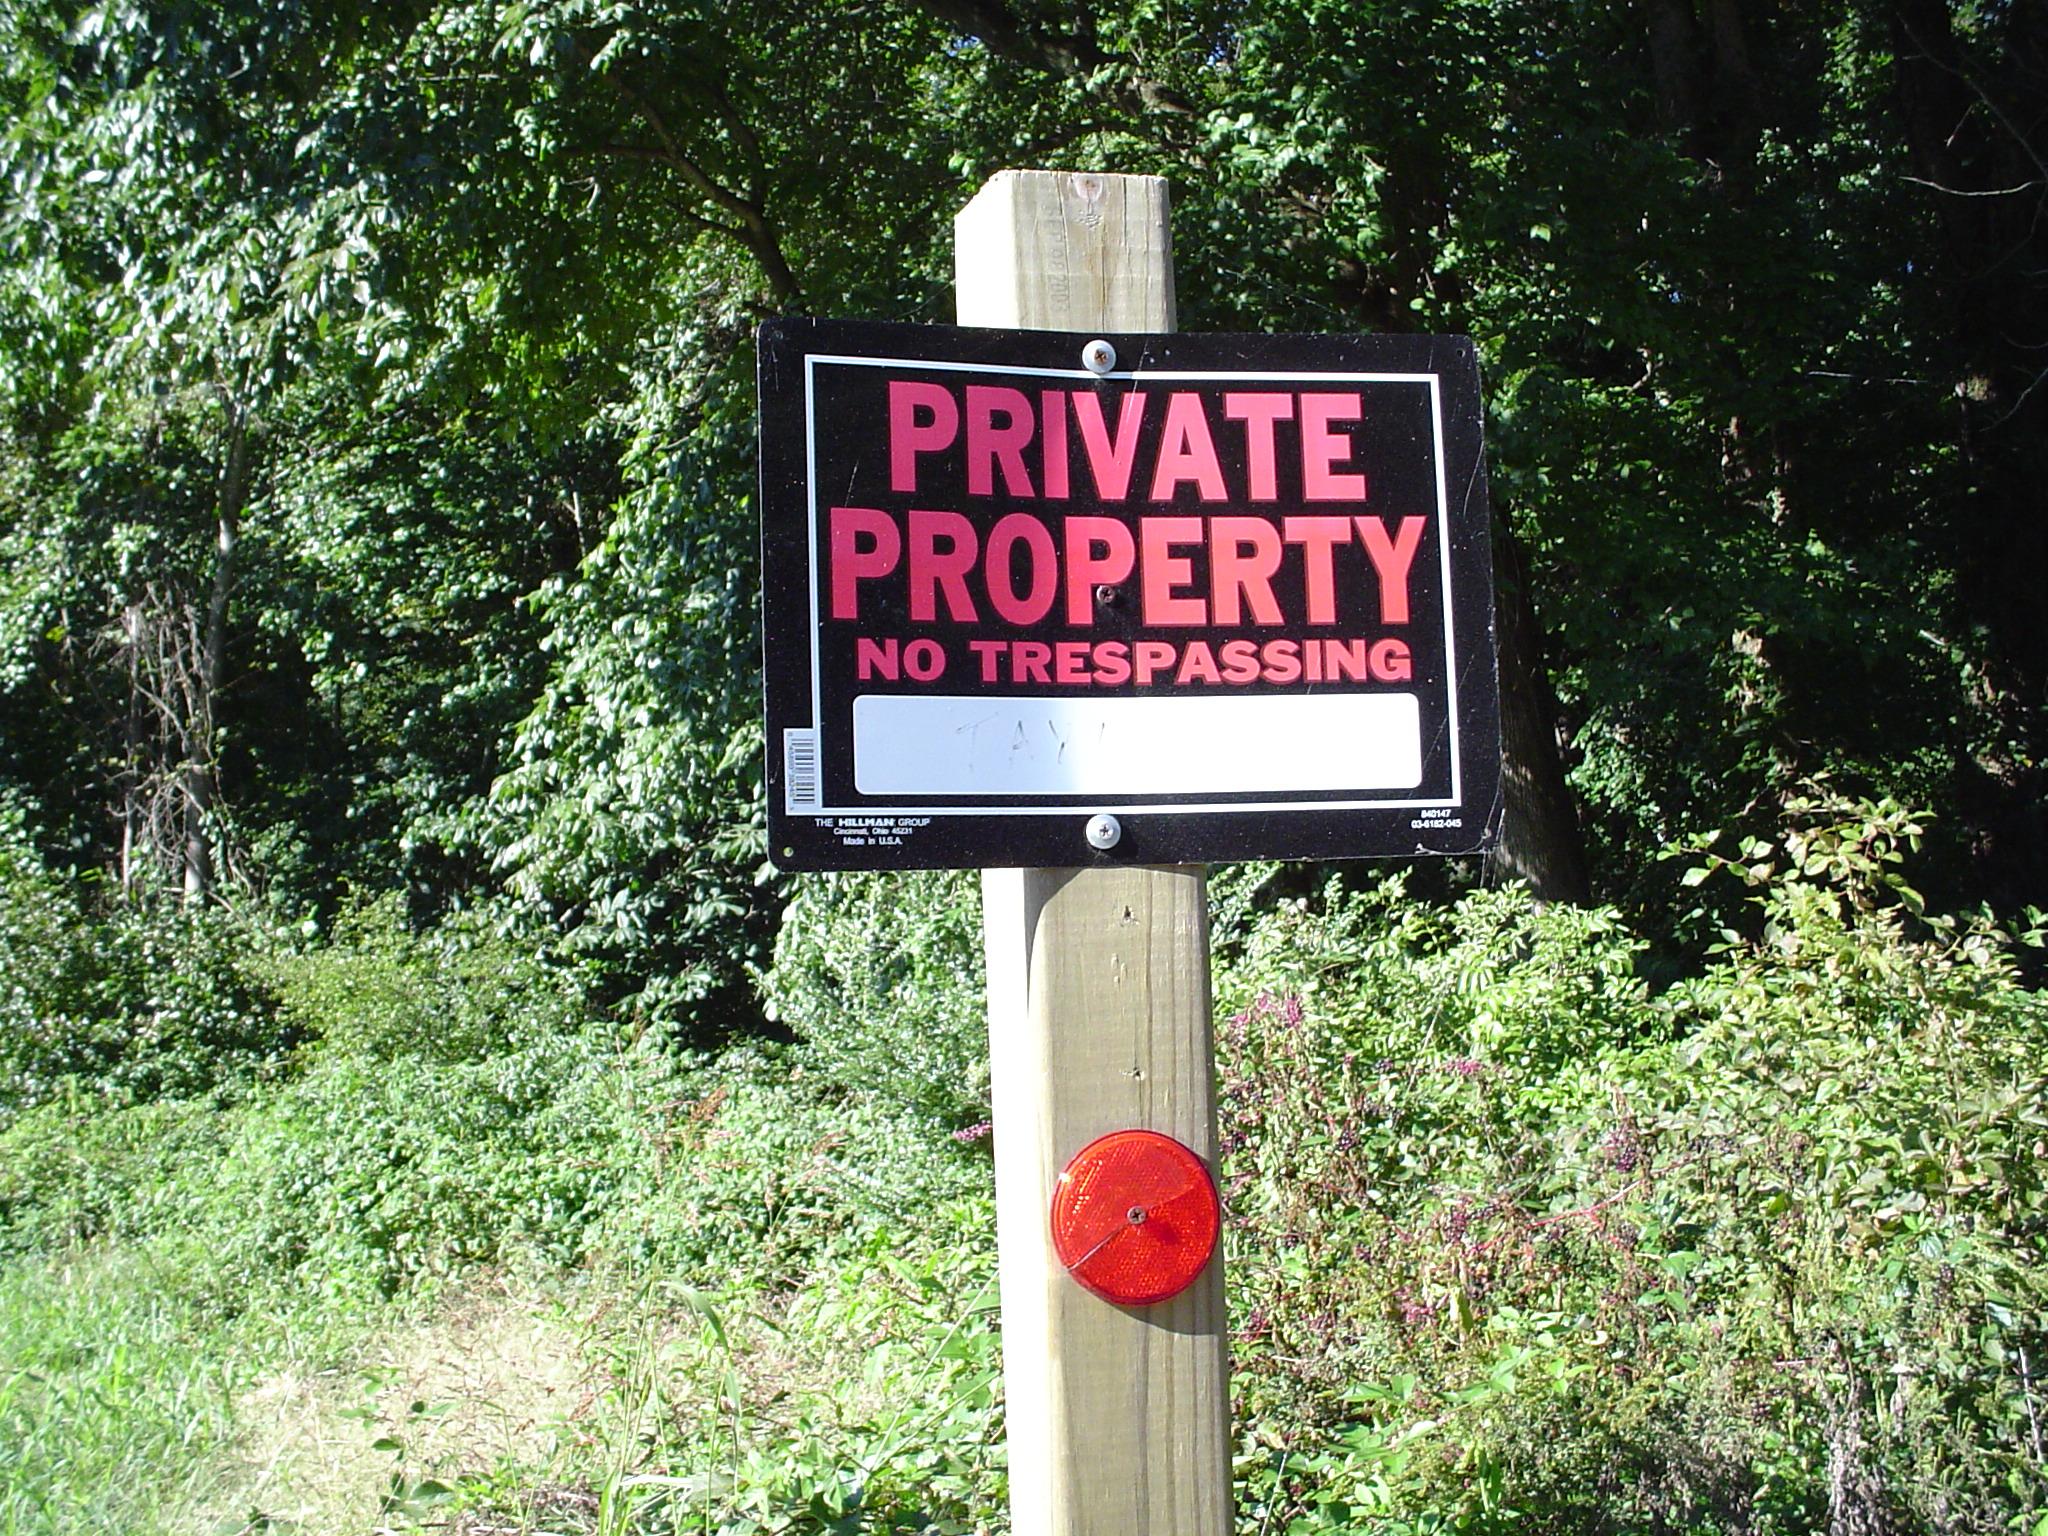 Private Property, No Trespassing sign posted on wooden post